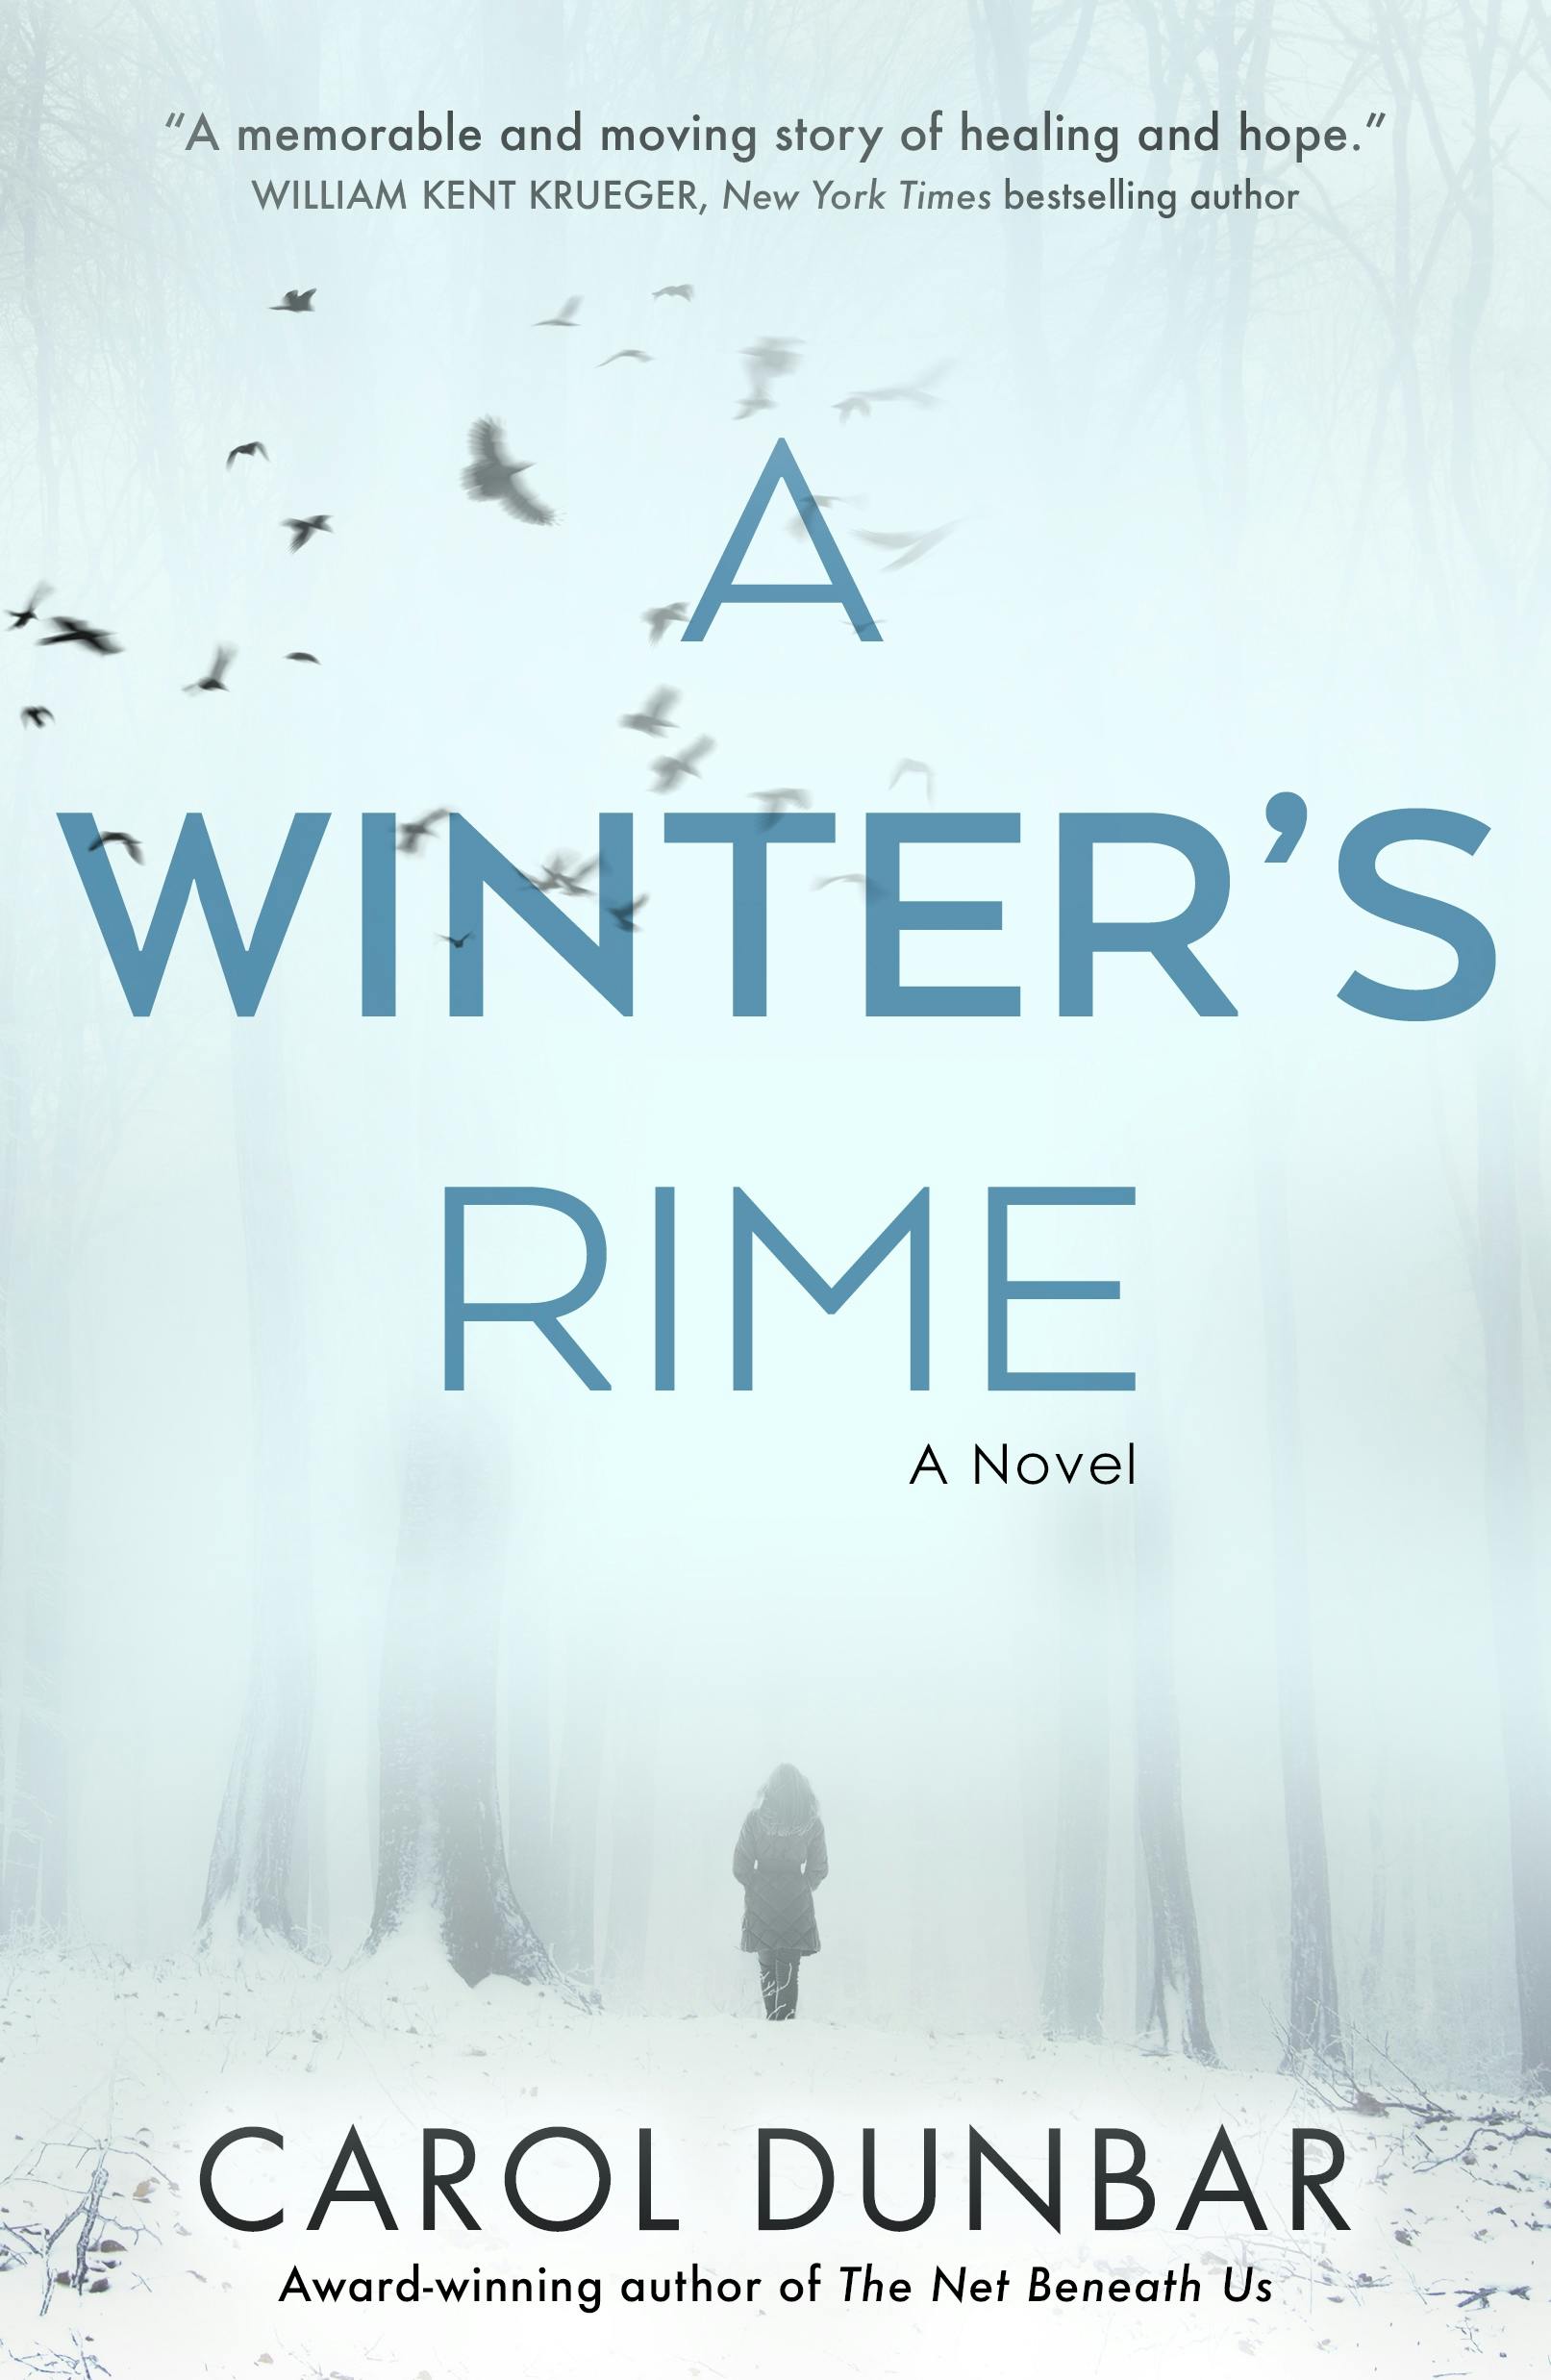 Cover for the book titled as: A Winter's Rime